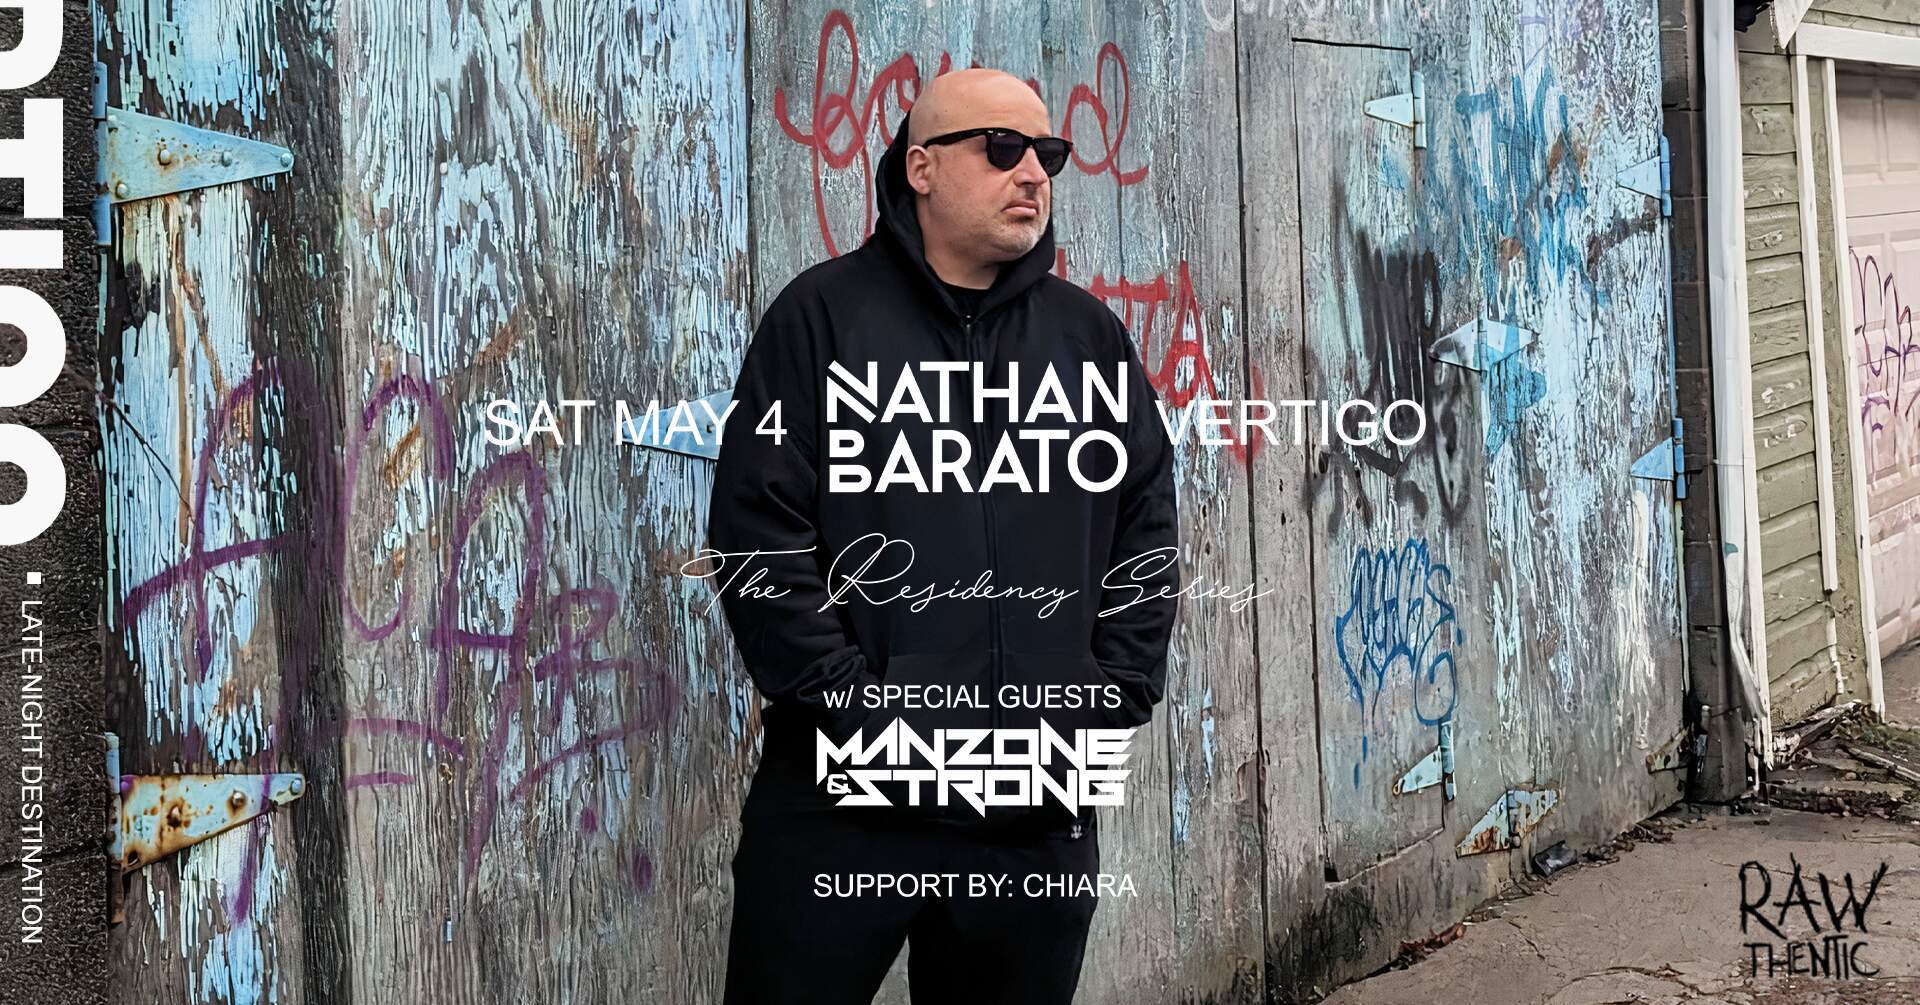 Nathan Barato - The Residency Series - Página frontal